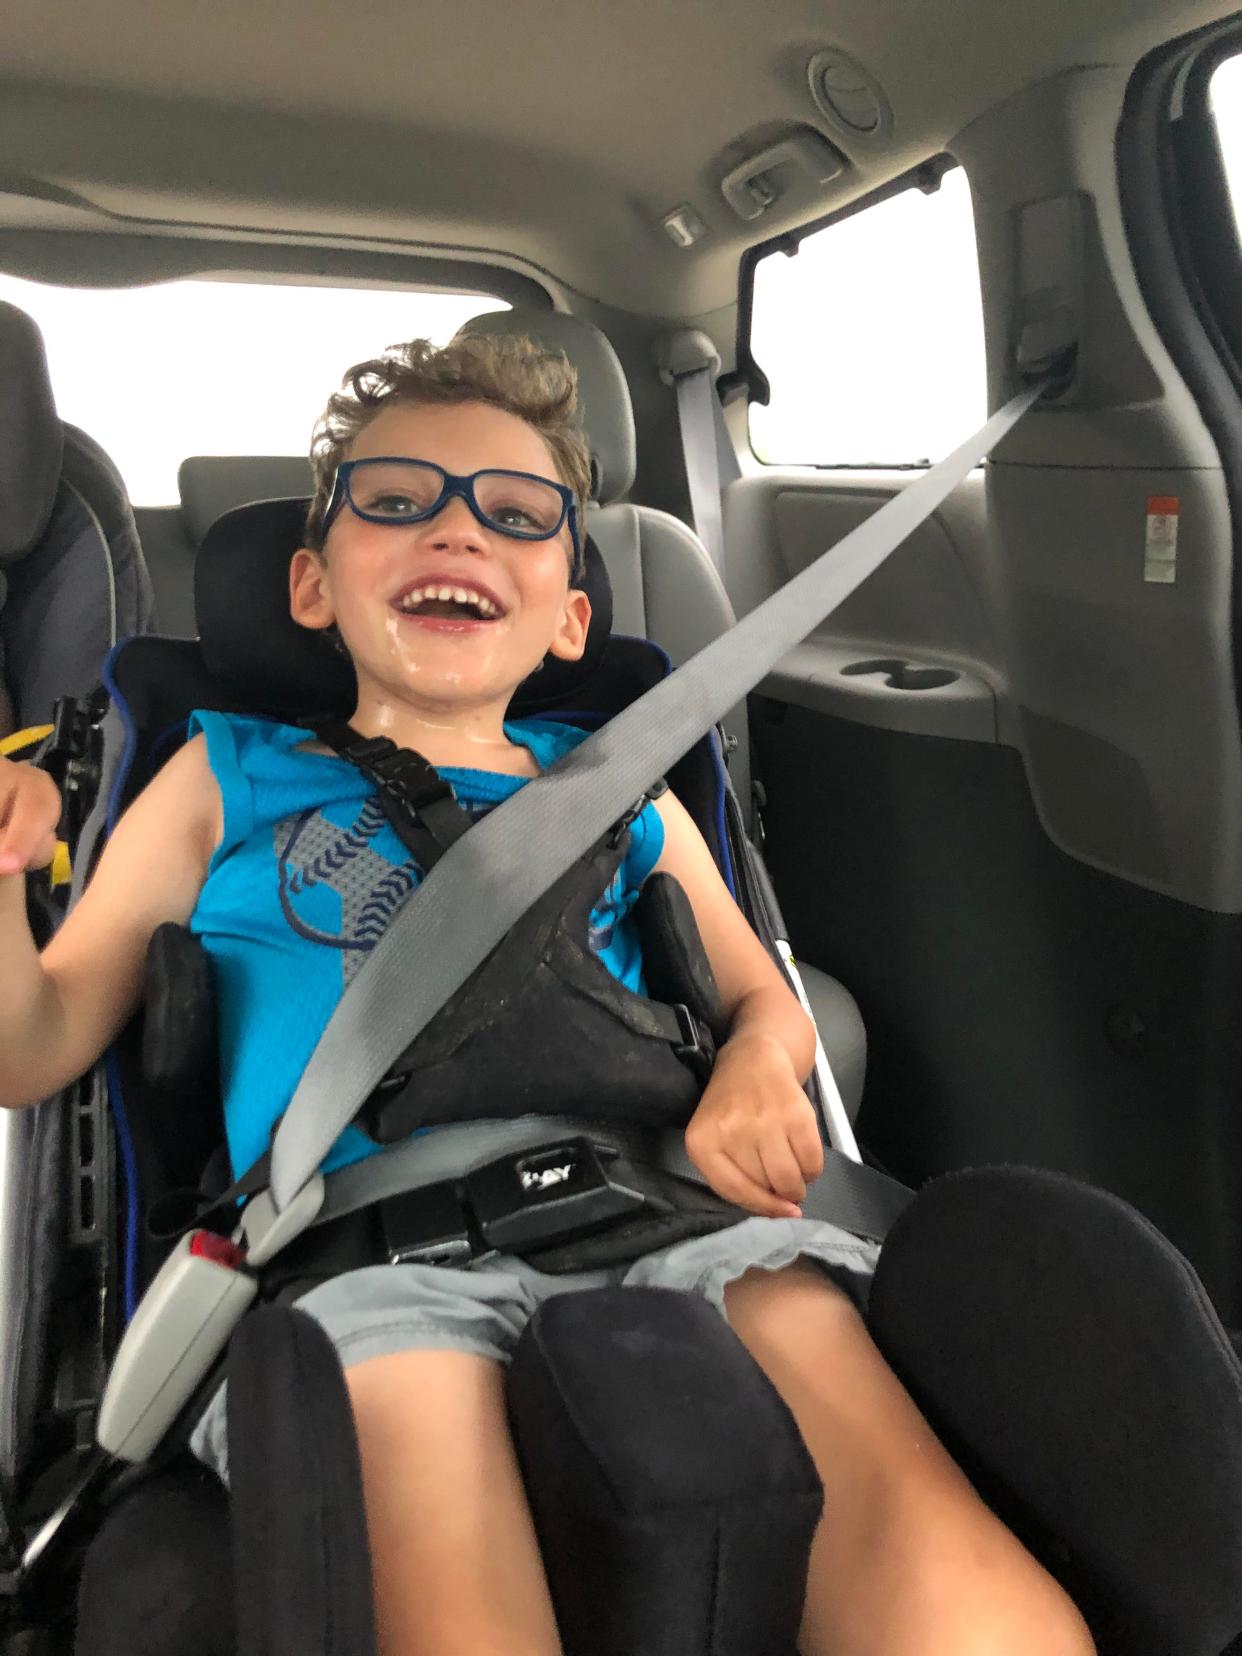 Nine-year-old Gage Wingo smiles in the back of his family's car. When a family member helped the Wingo family purchase a van that would accommodate Gage's wheelchair, it inspired his mom Hannah Wingo to help others in similar situations.